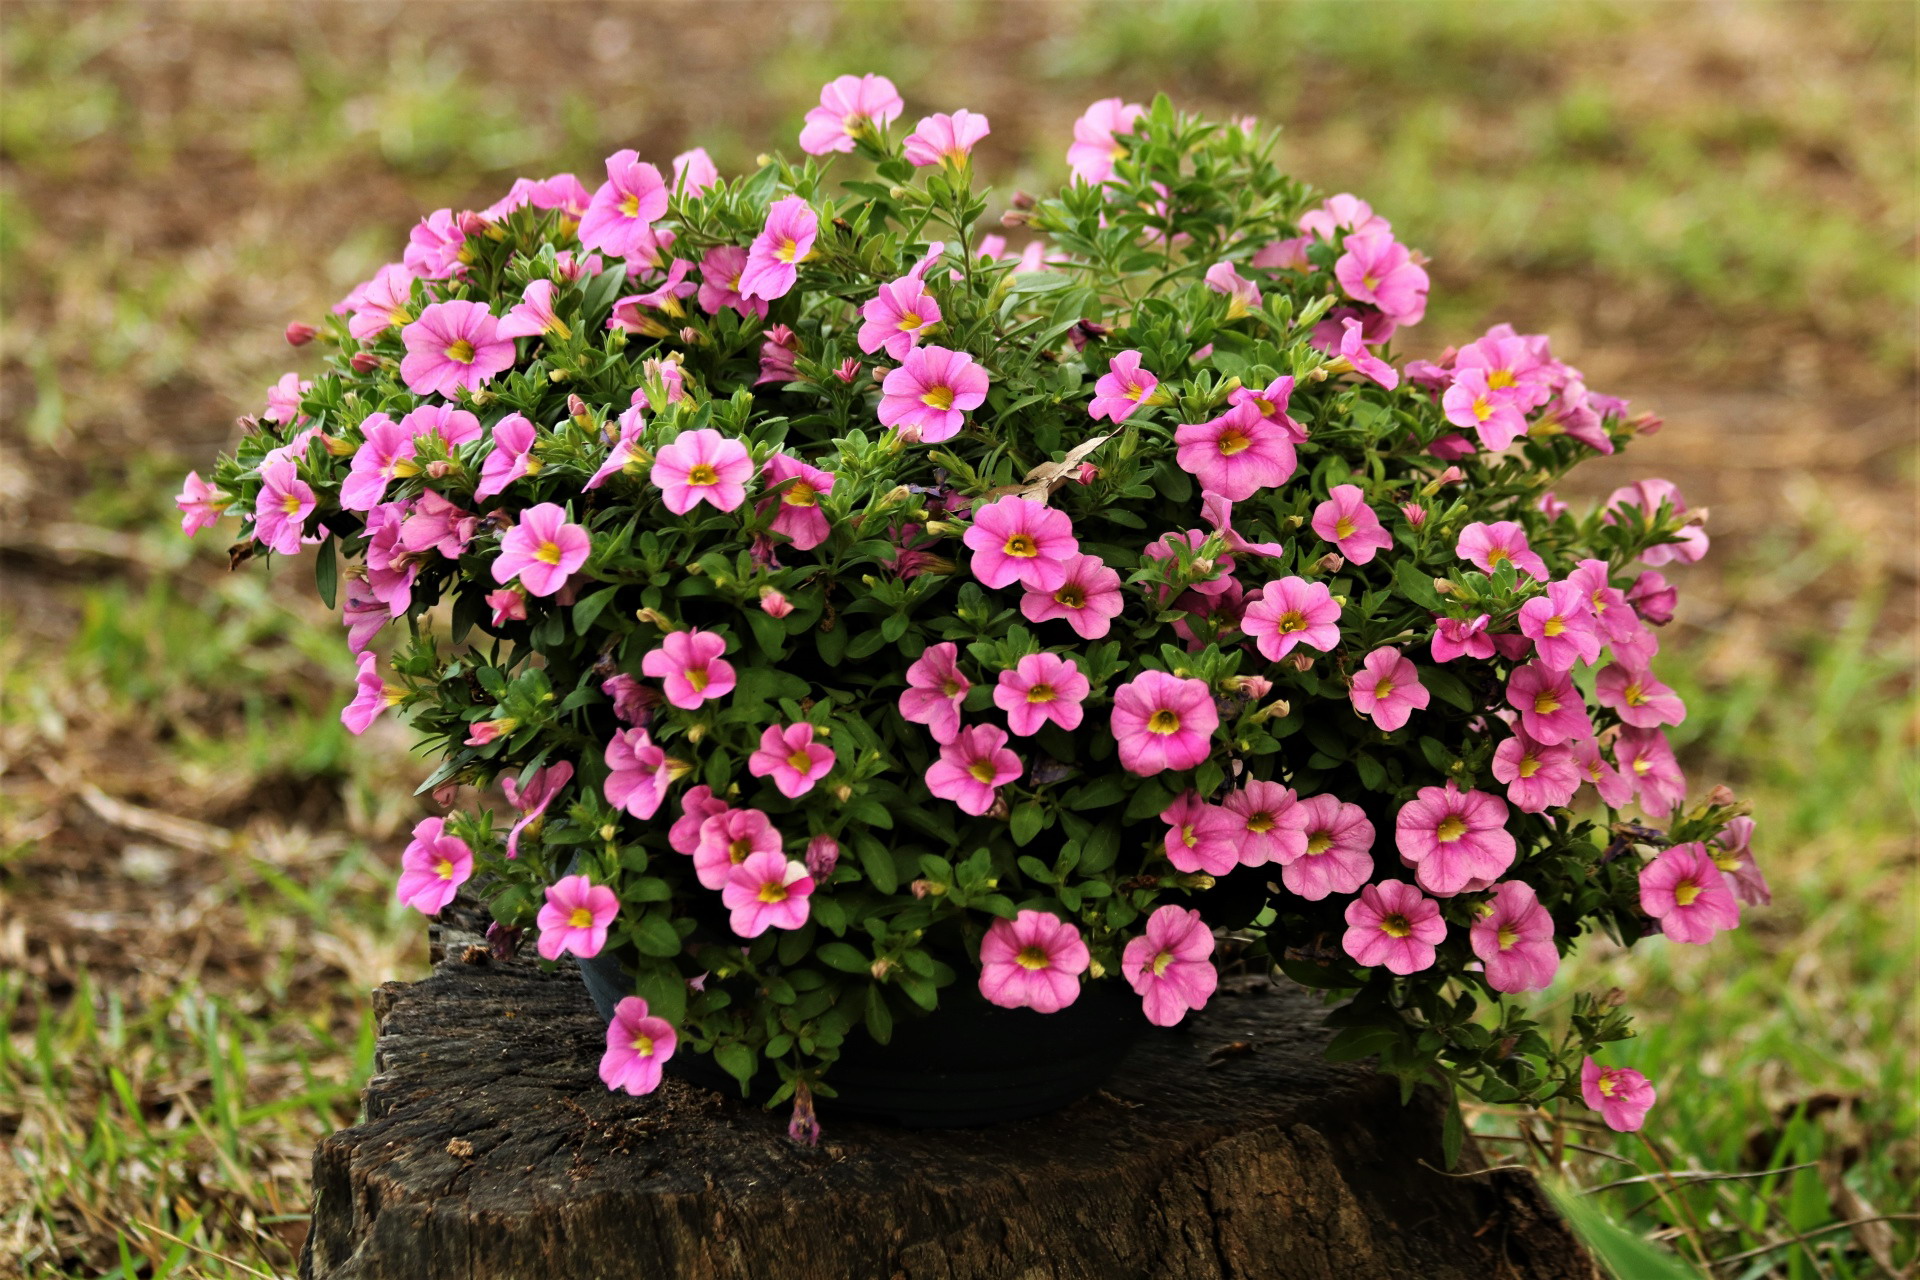 earth, petunia, pink flower, flowers wallpaper for mobile